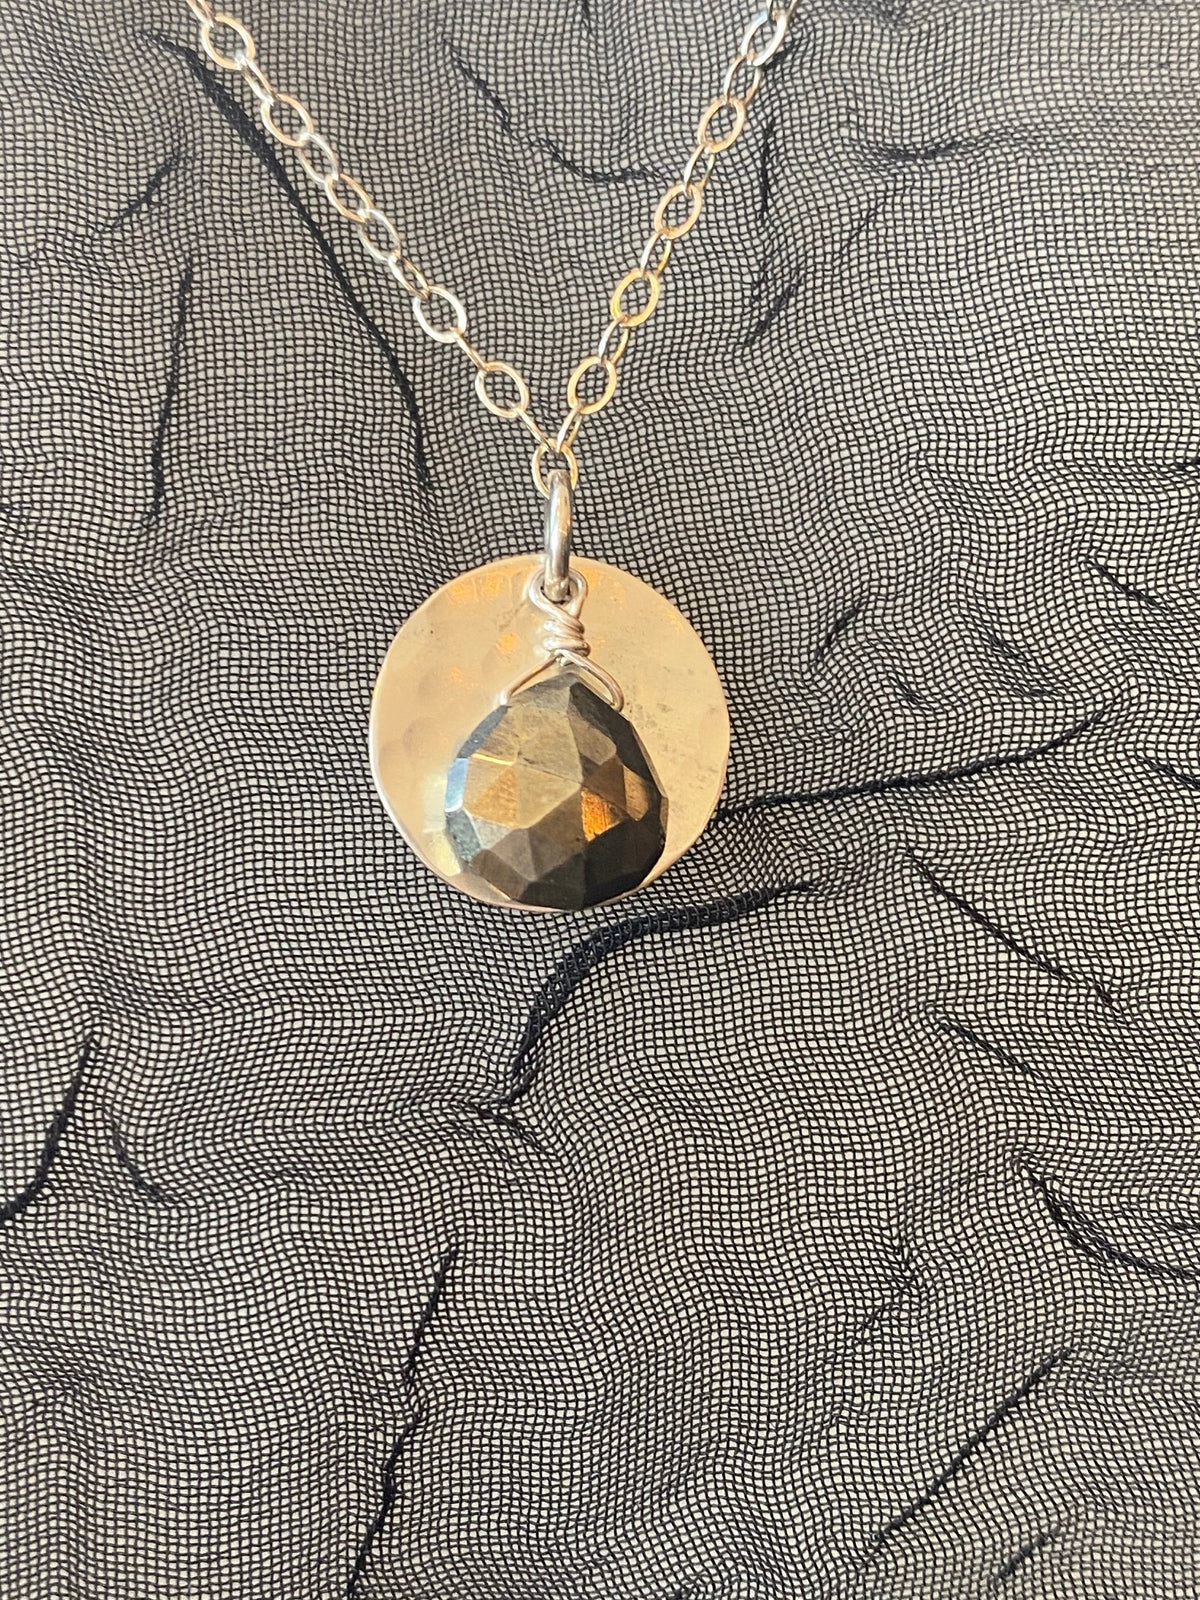 Vannucci Silver Disk with Pyrite Charm Necklace